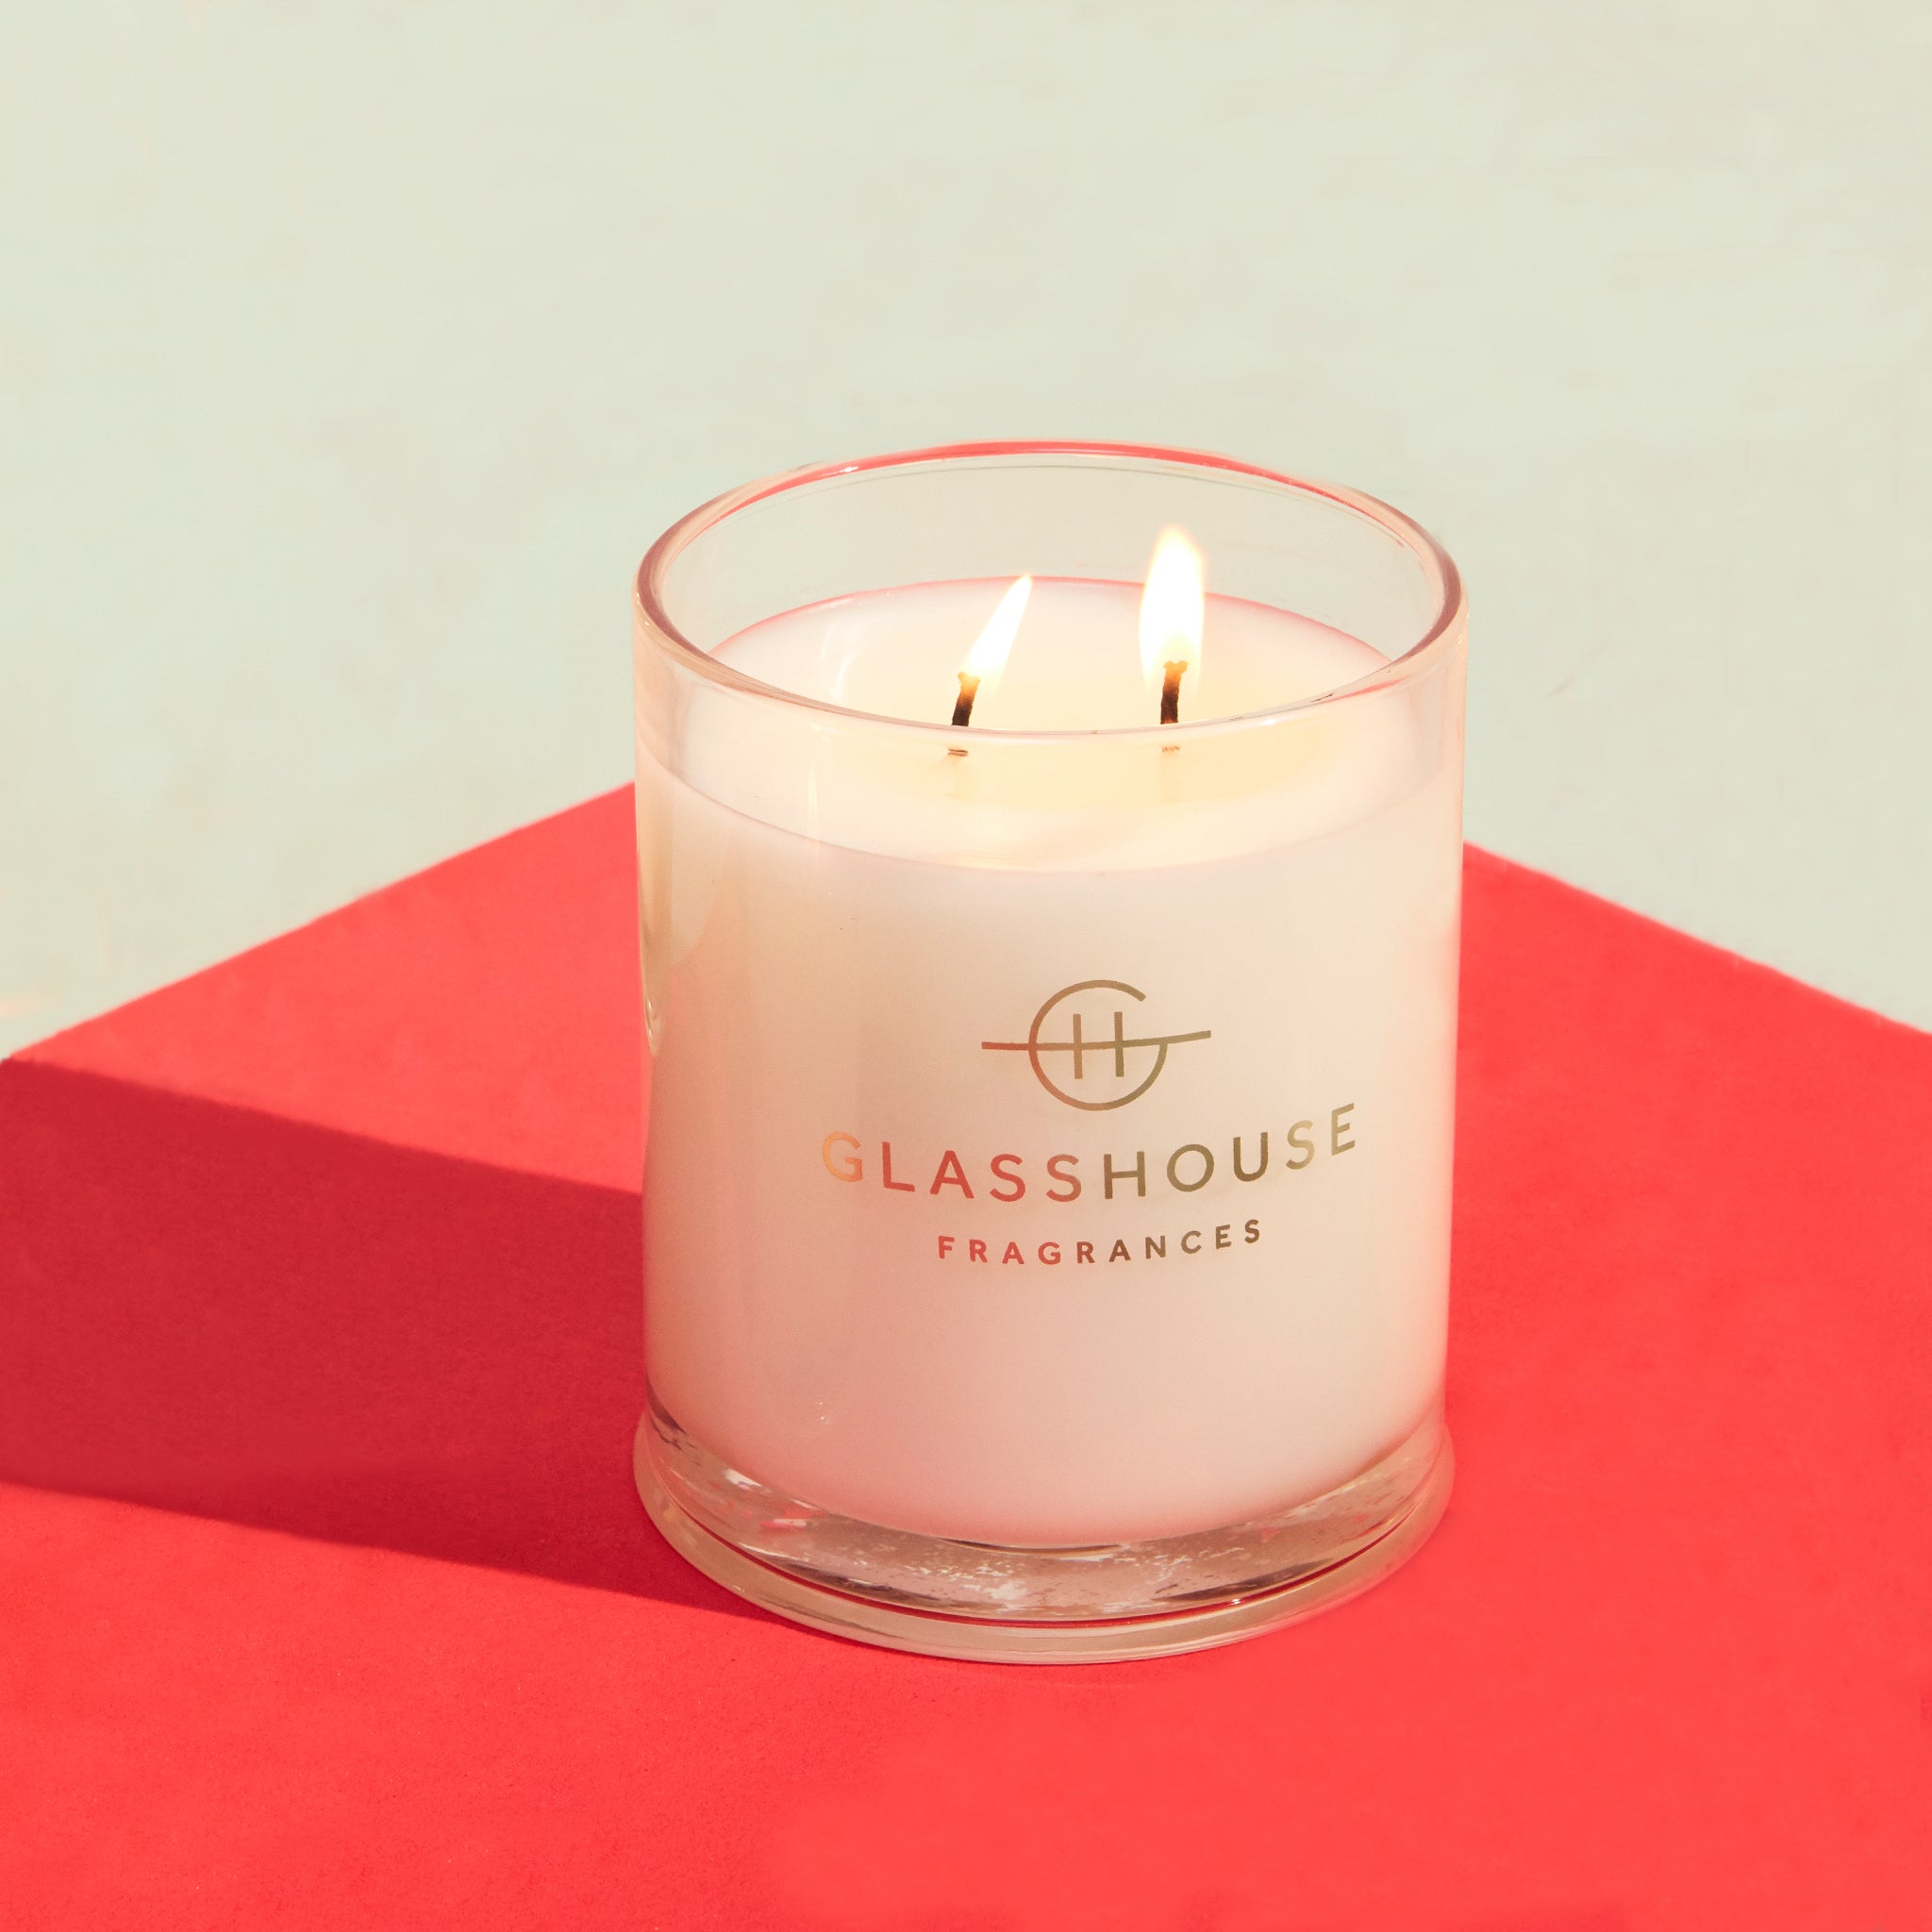 Glasshouse Frangrances soy candle burning on red tabletop